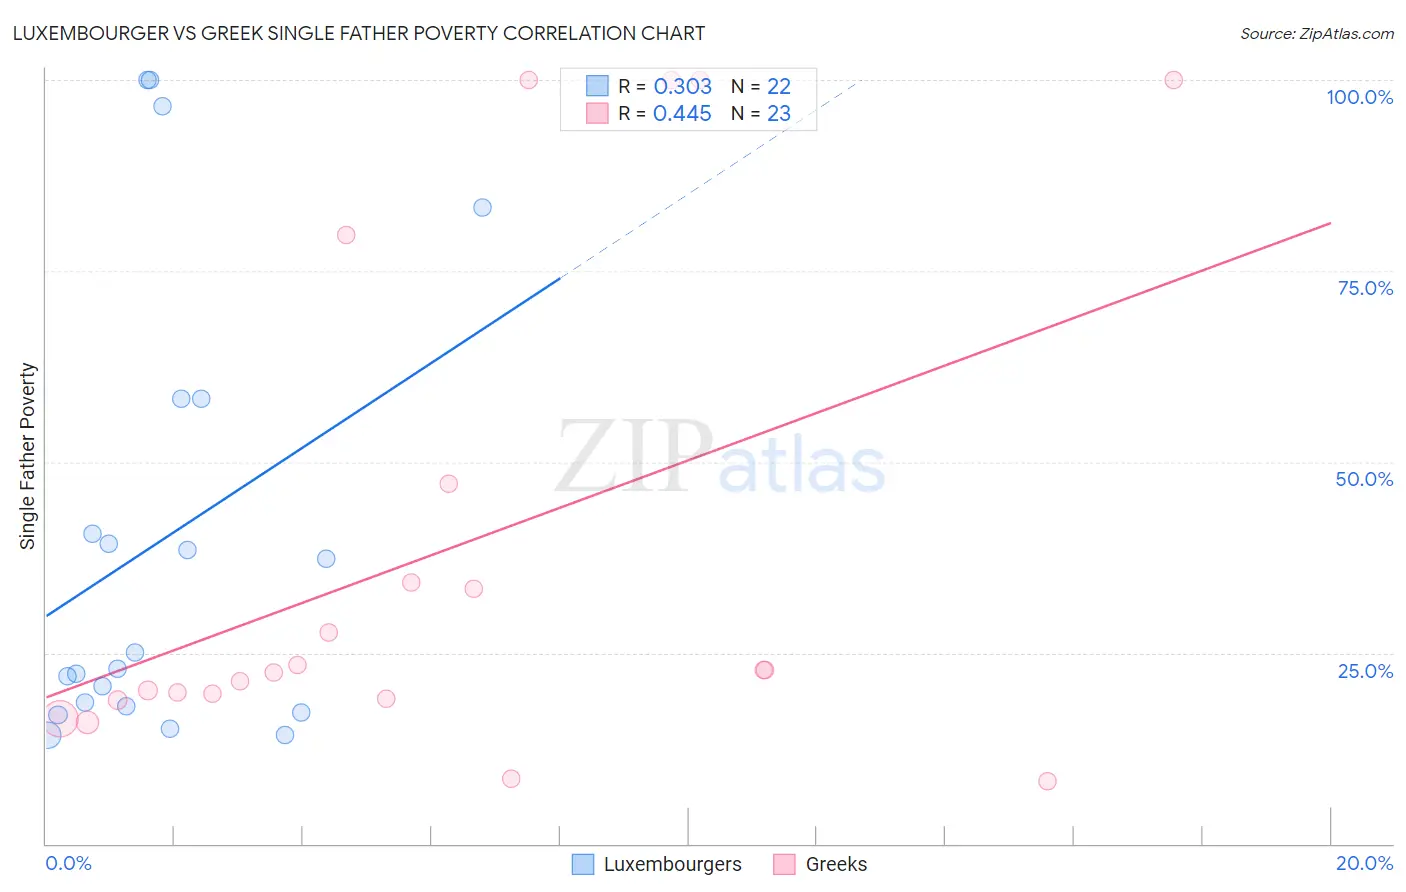 Luxembourger vs Greek Single Father Poverty